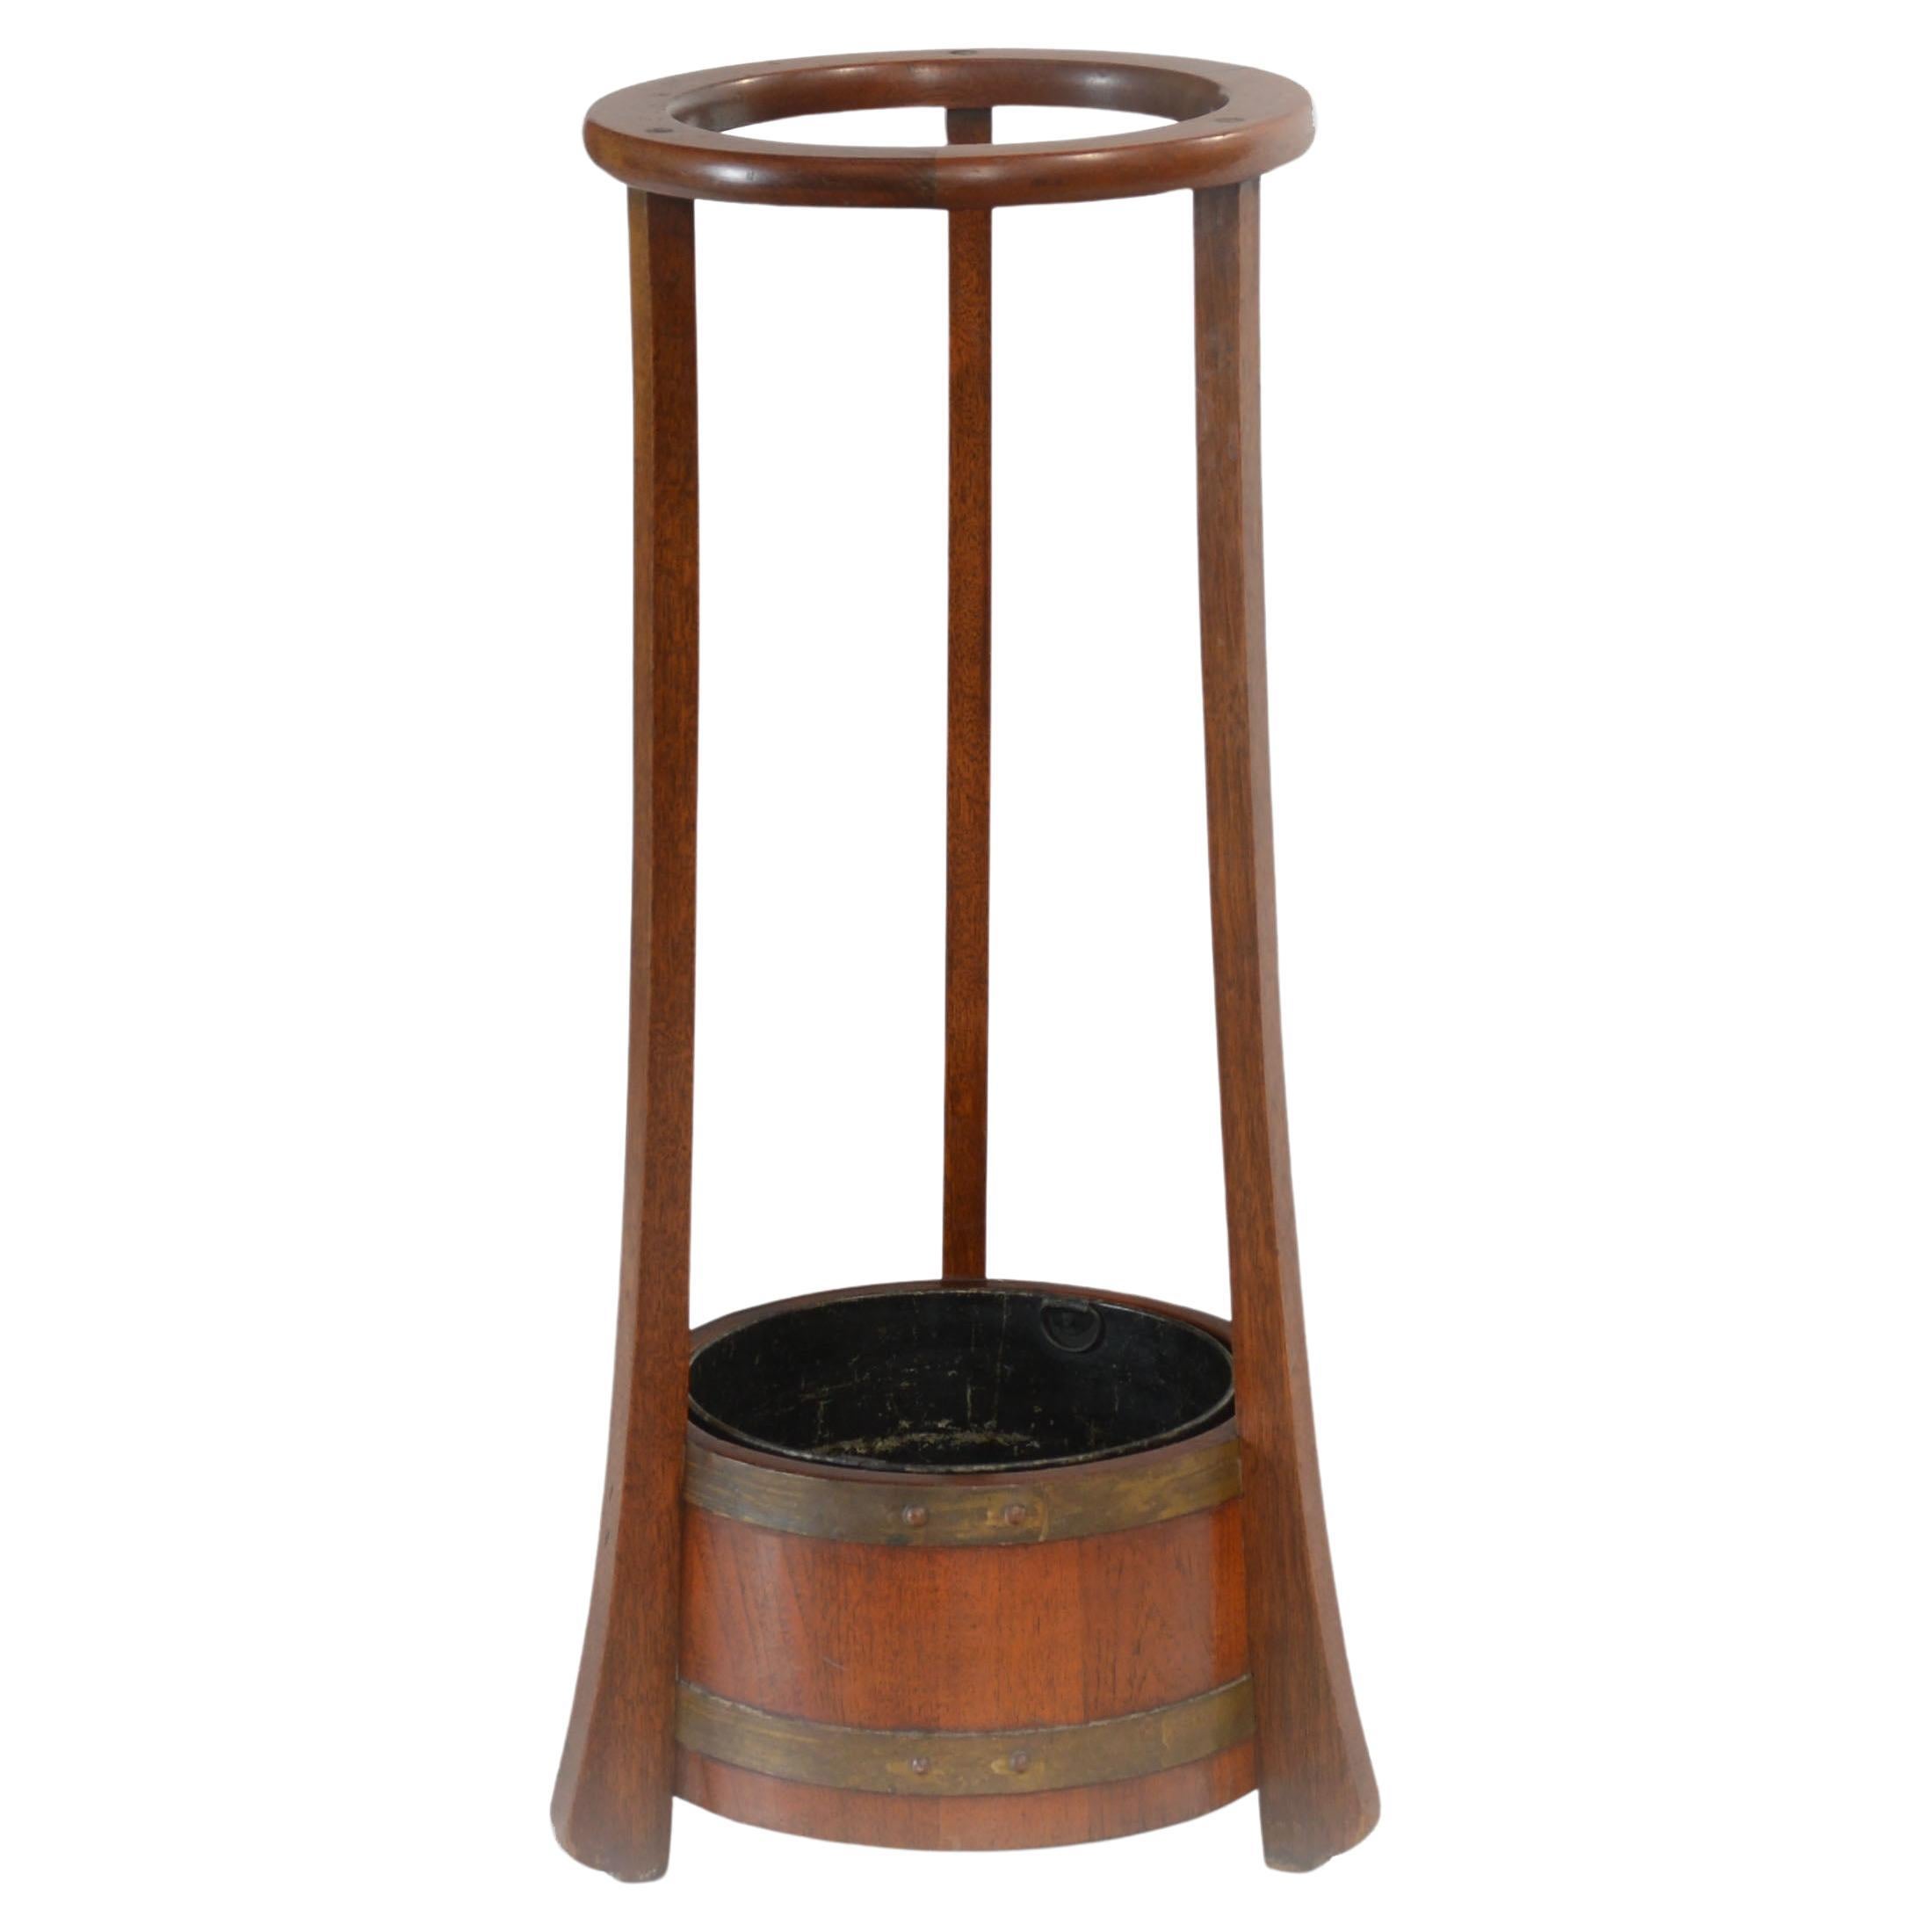 Teak Umbrella and Walking Stick Stand by R.A. Lister & Co, England